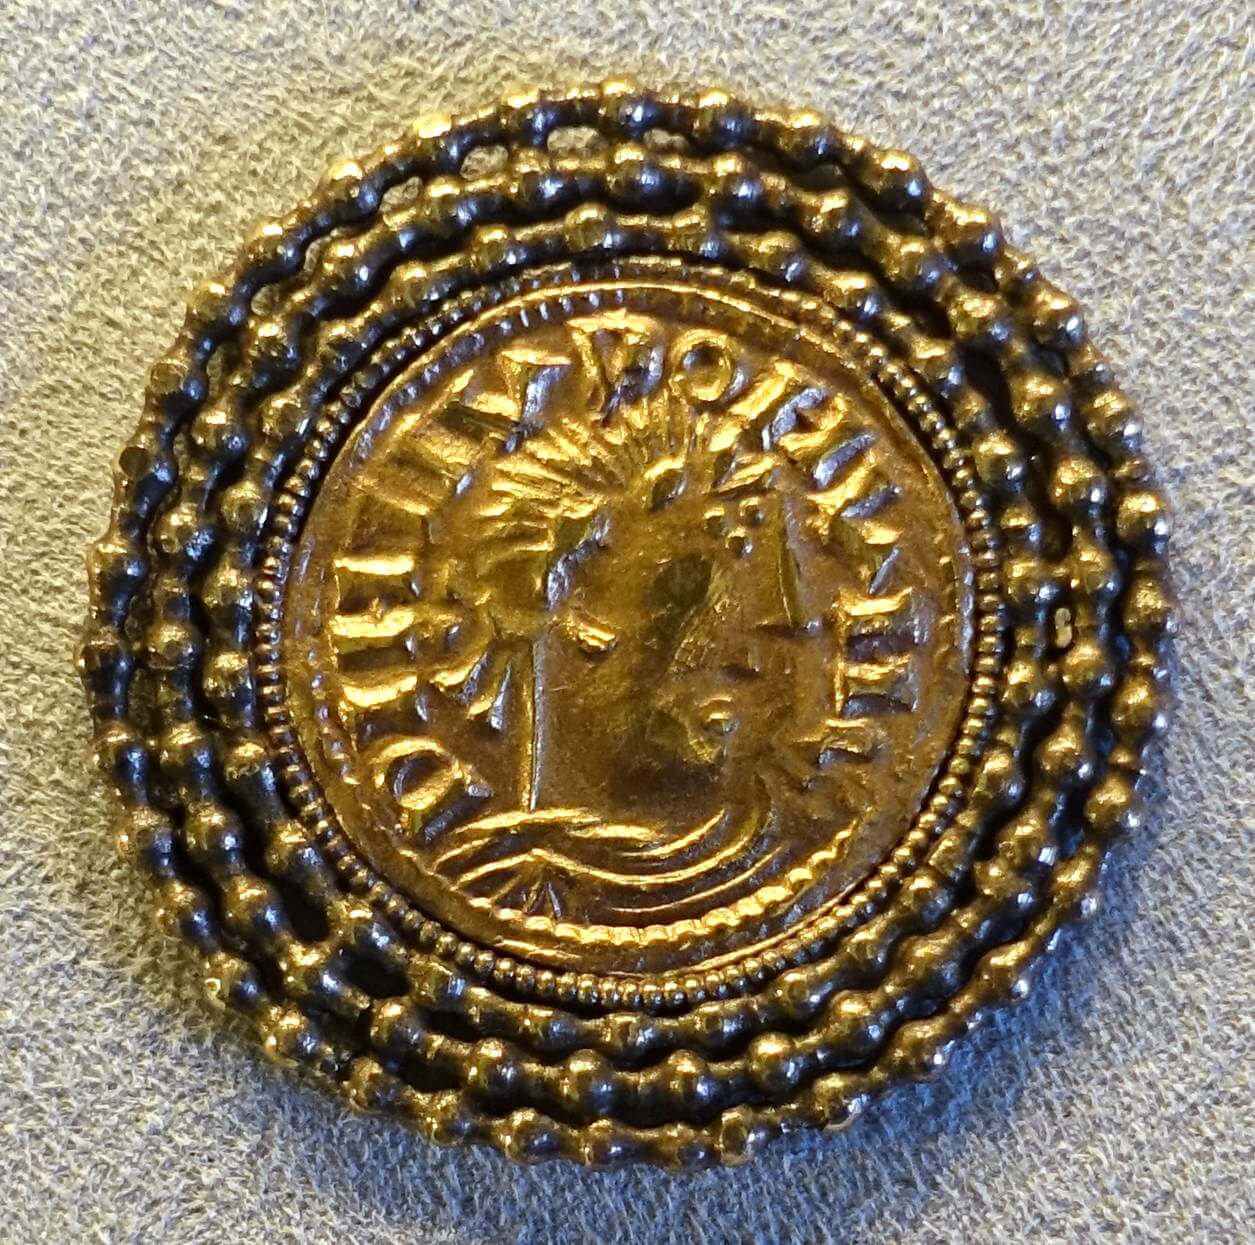 Counterfeit after Louis the Pious solidus, 9th century AD